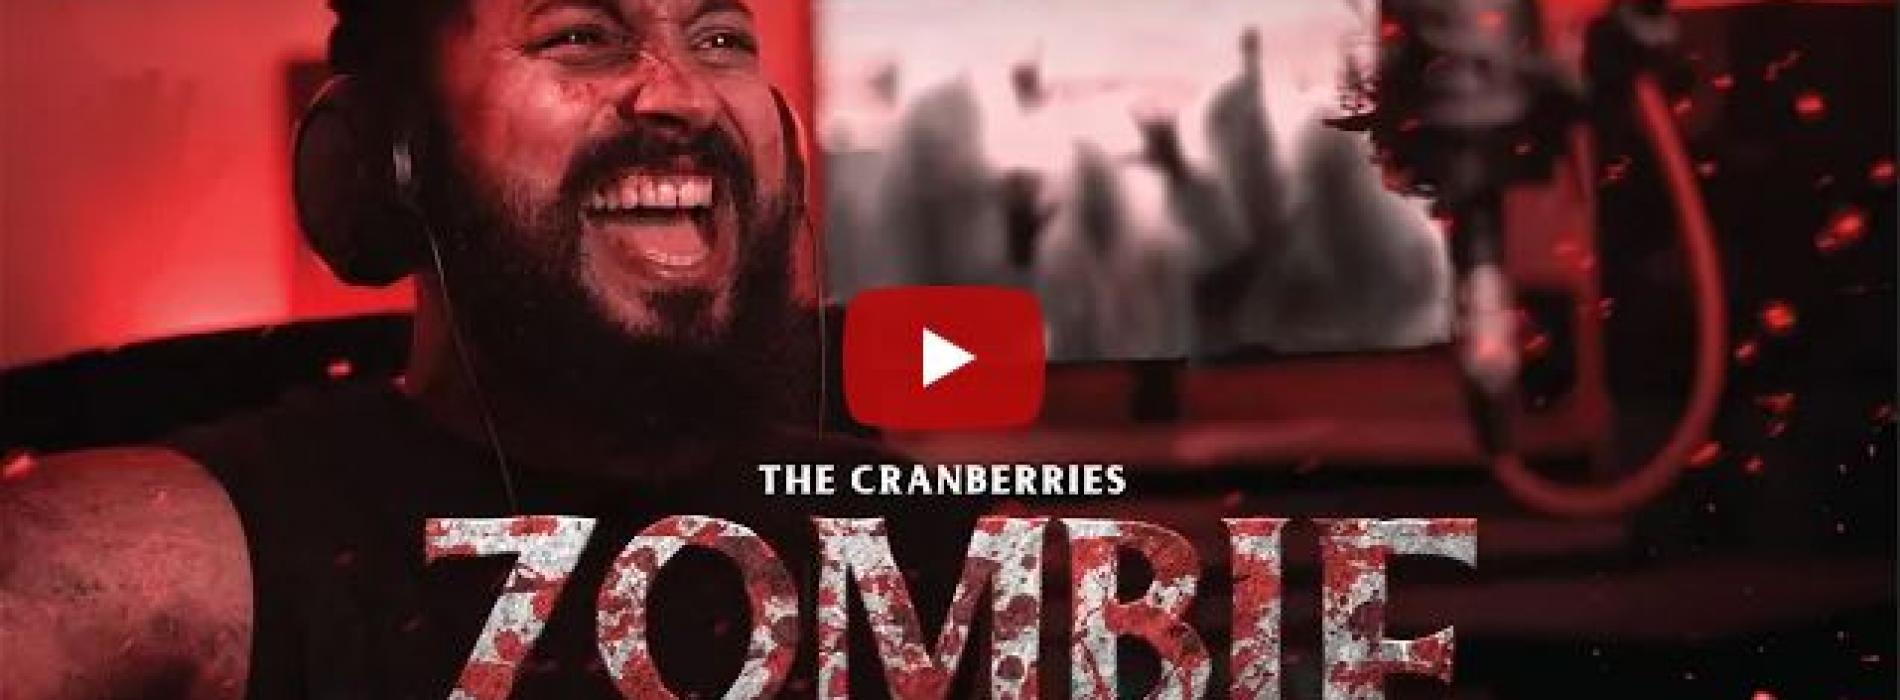 New Music : The Cranberries – Zombie Cover By Gimantha Arampath